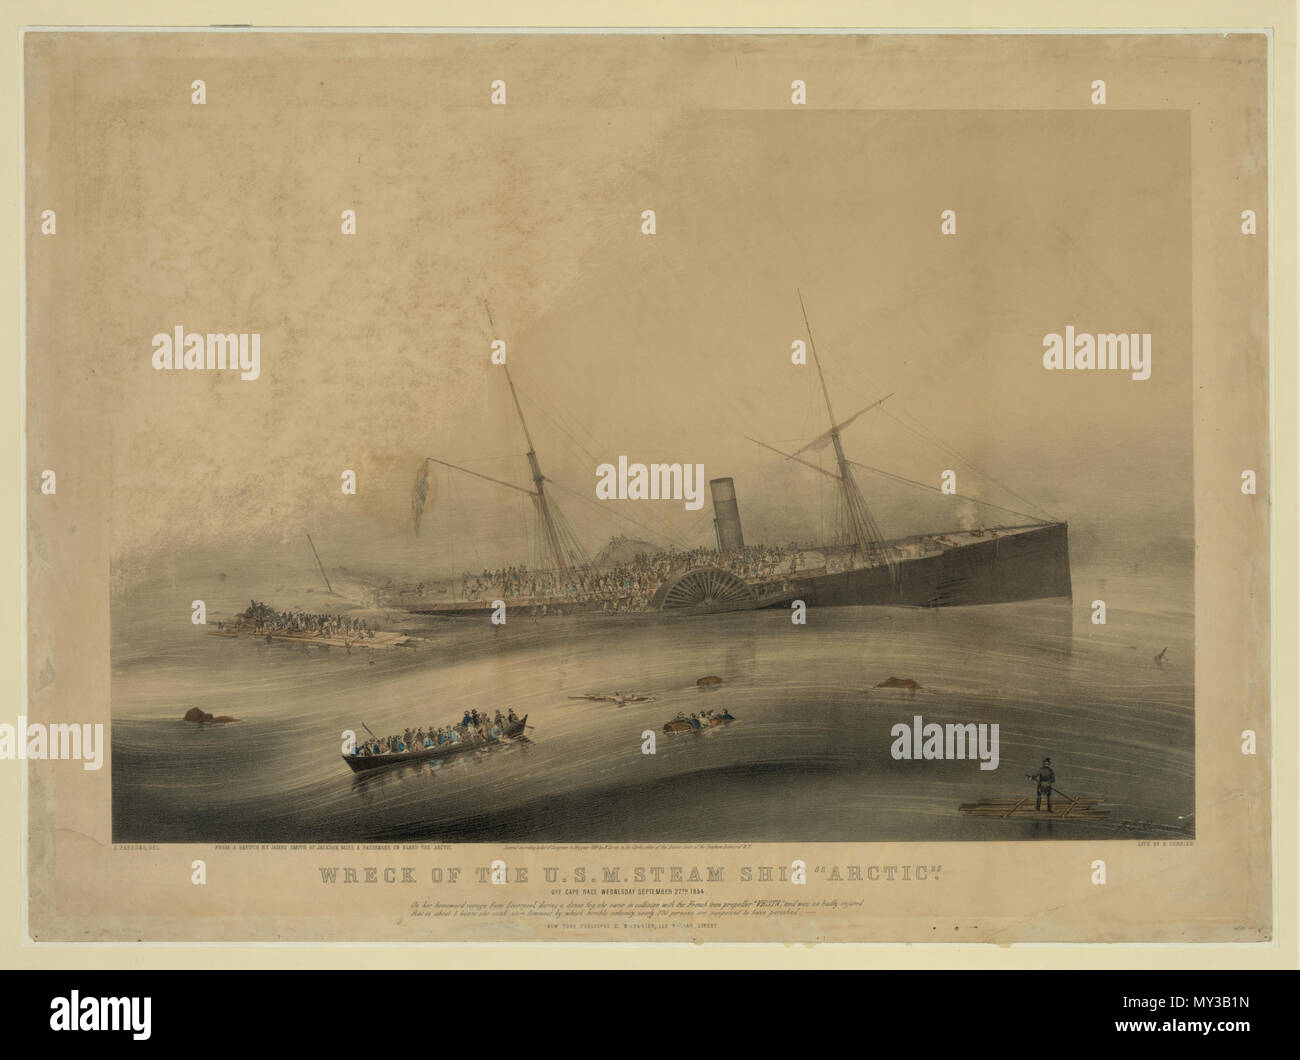 . English: Original caption: 'Wreck of the U.S.M. Steam Ship 'Arctic'. Off Cape Race Wednesday September 27th 1854. On her homeward voyage from Liverpool, during a dense fog, she came in collision with the French iron propeller 'VESTA,' and was so badly injured that in about 5 hours she sunk stern foremost by which terrible calamity nearly 300 persons are supposed to have perished.' . 1854. James E. Butterworth (artist) 568 Wreck of the U.S.M. steam ship &quot;Arctic&quot; (half-size) Stock Photo